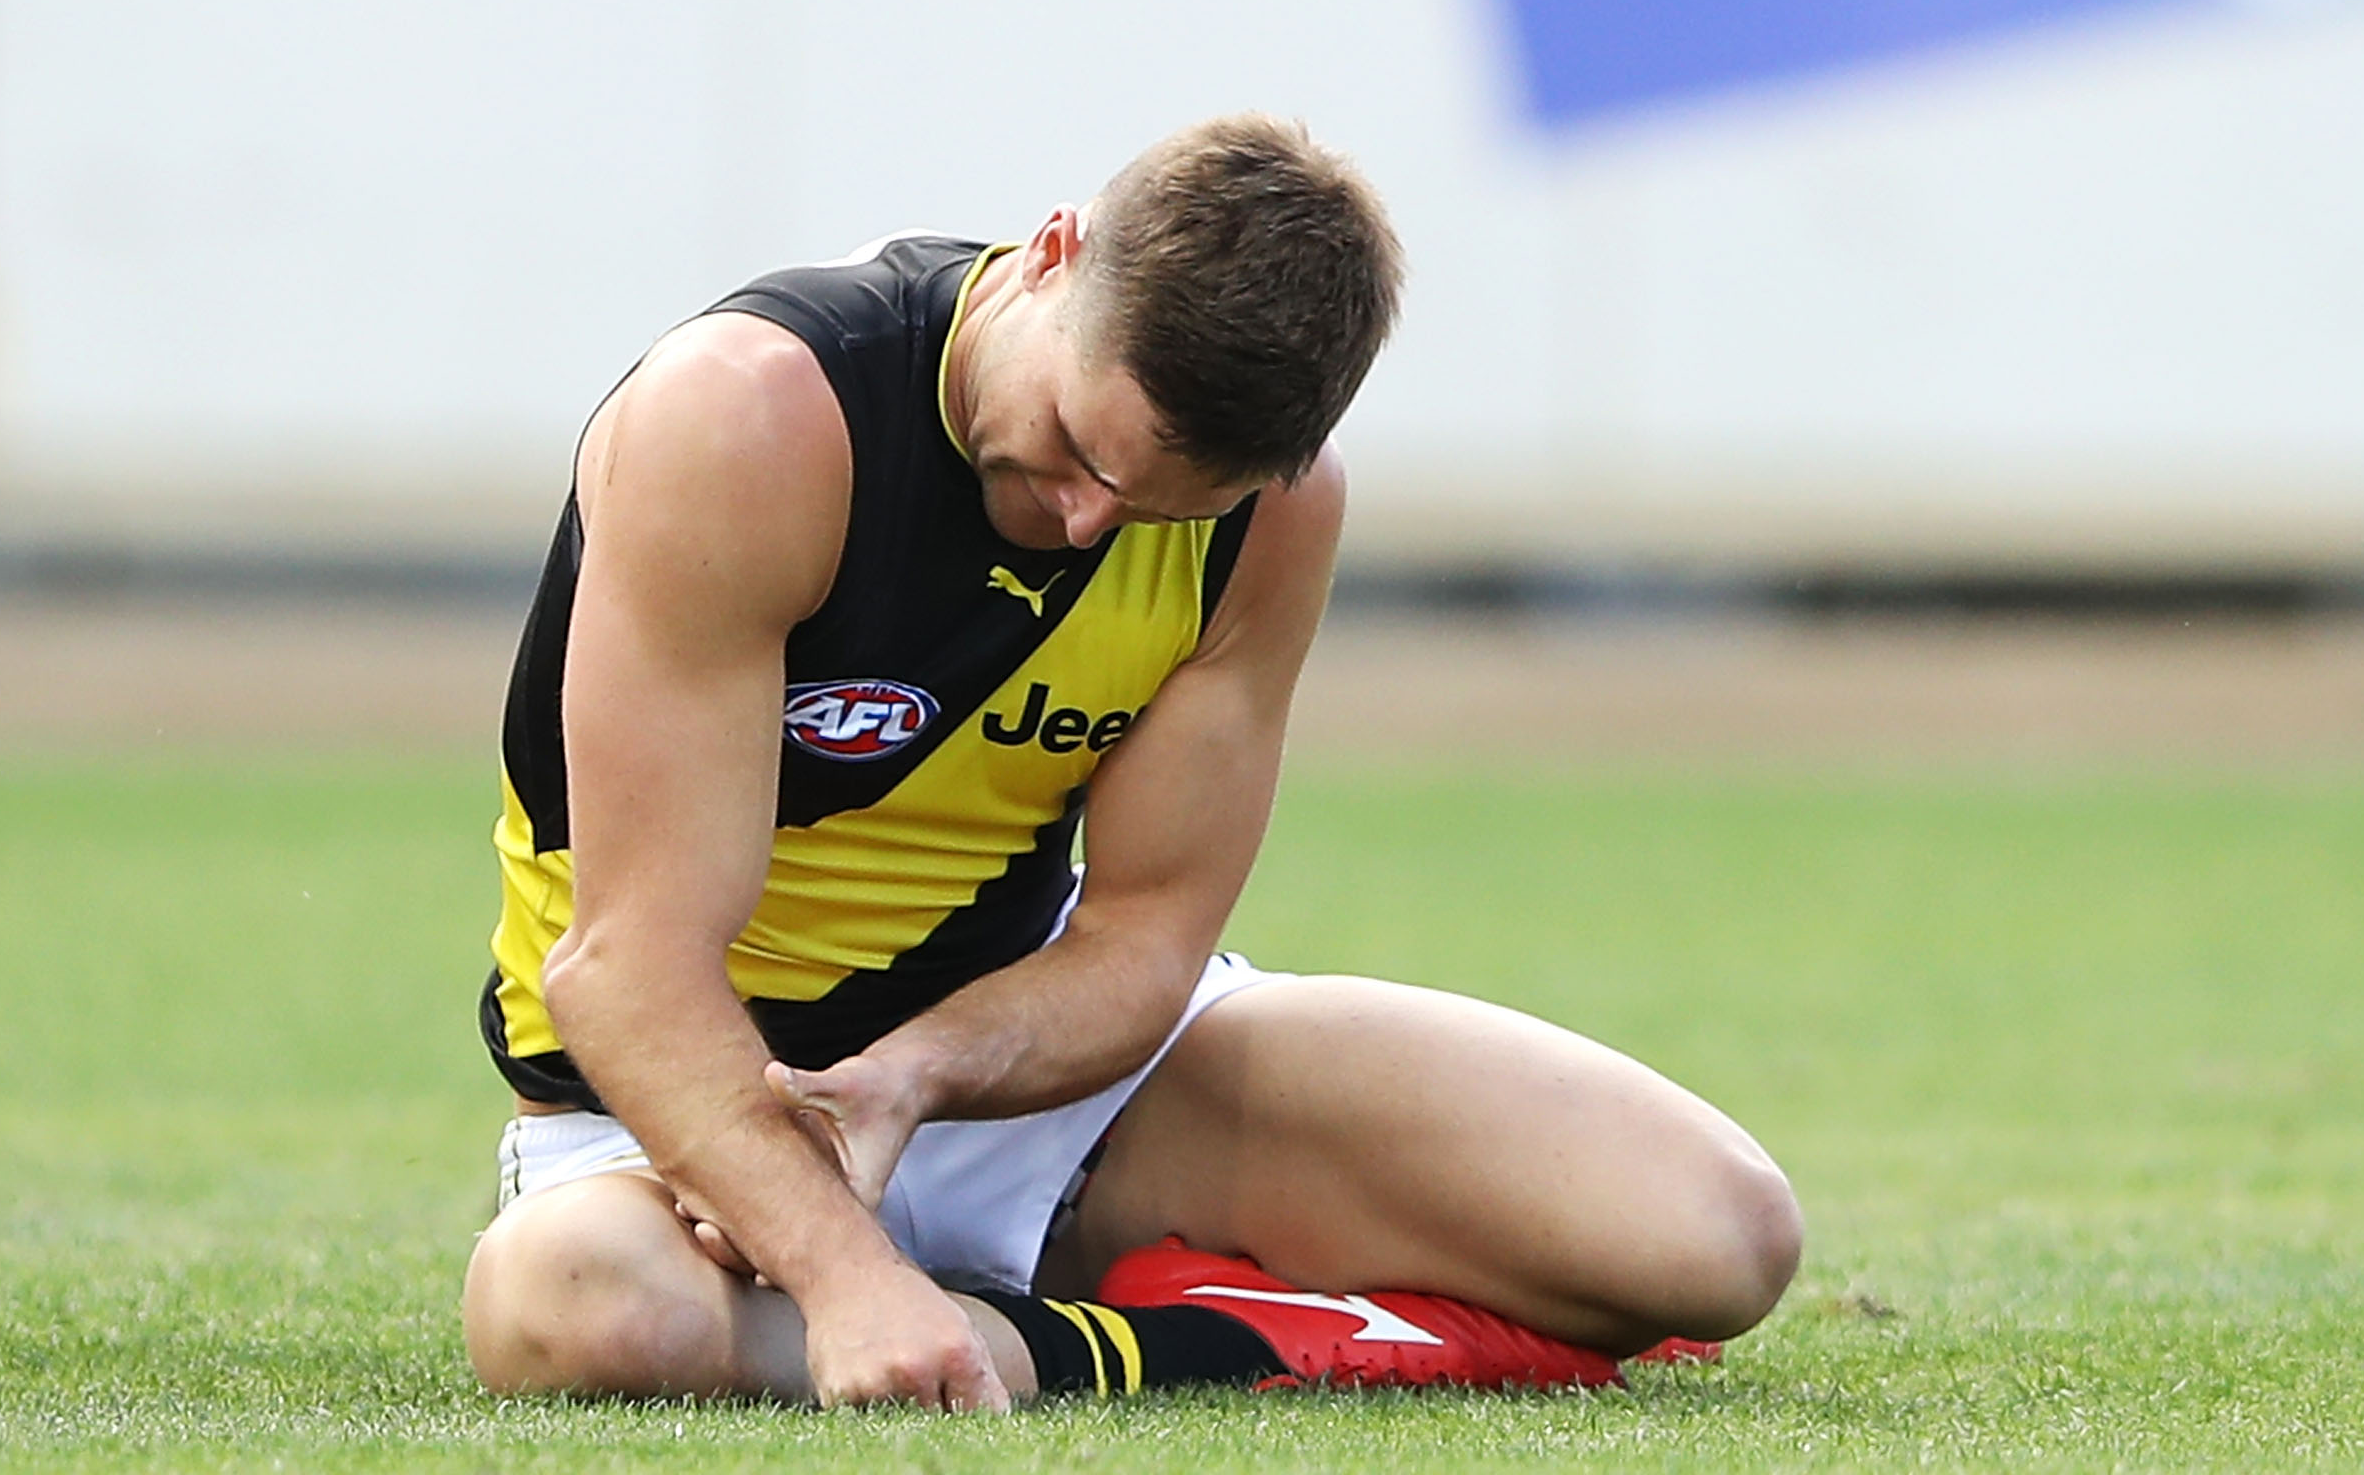 And Next In Horror Injuries, Here’s A Vid Of A Gnarly Elbow Dislocation At The AFL